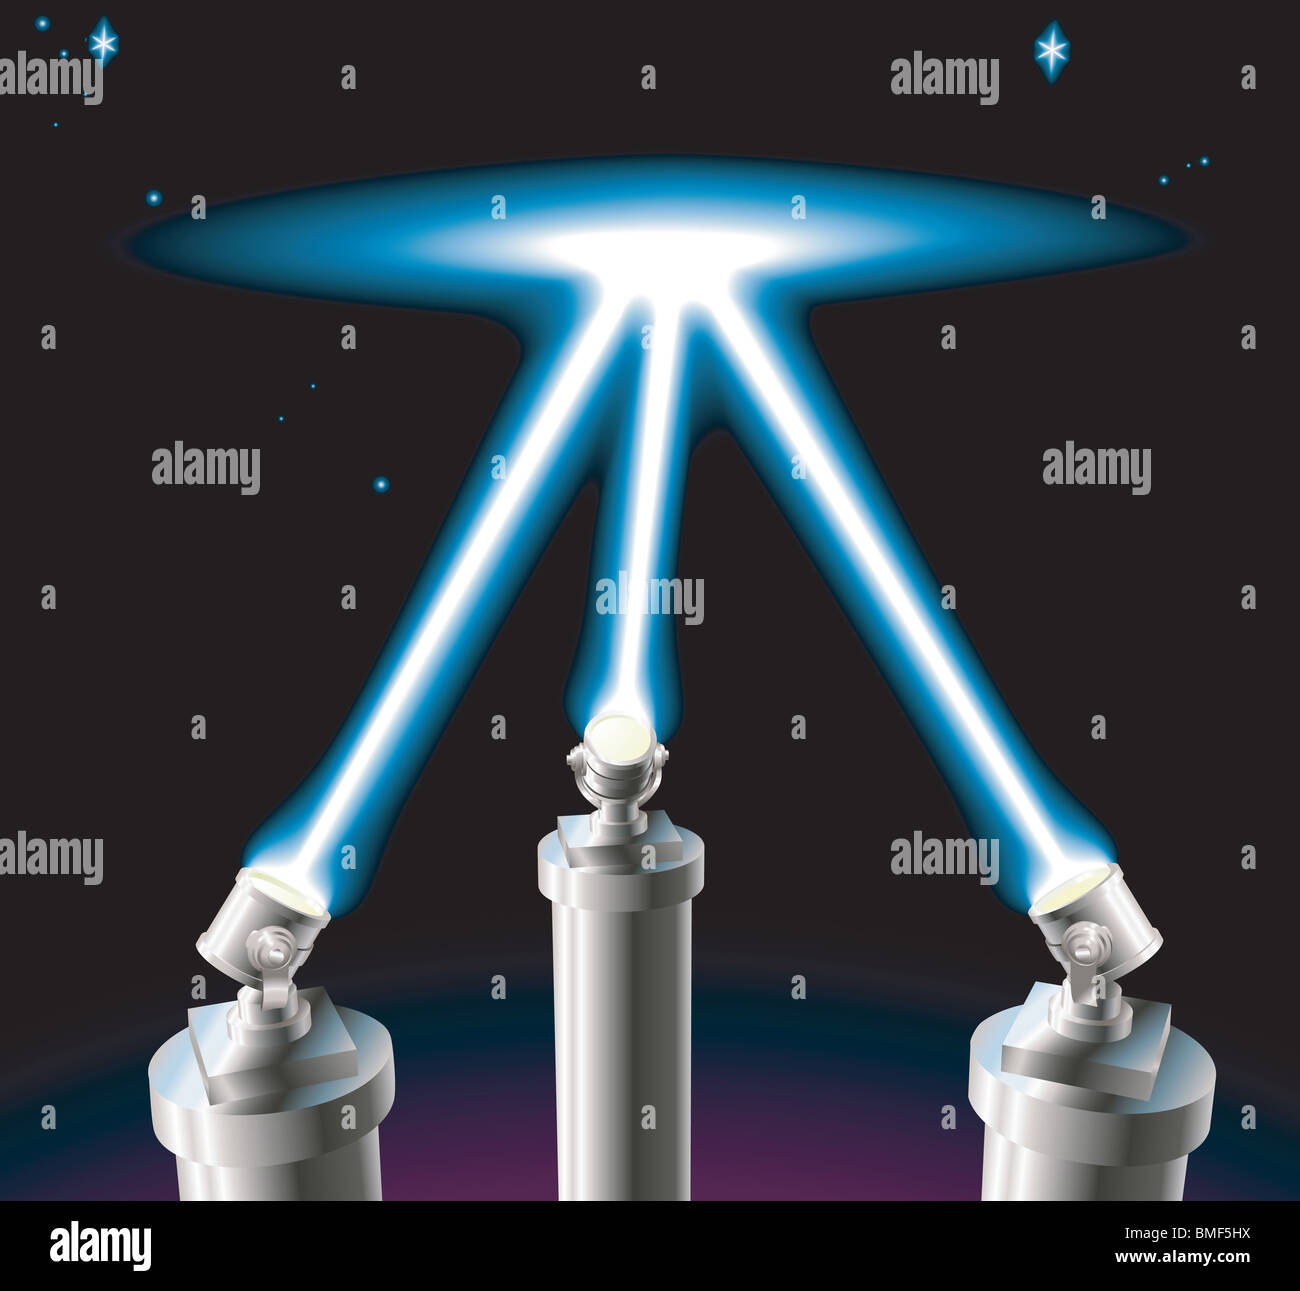 Some searchlights or spotlights lighting up the starry night sky. Stock Photo